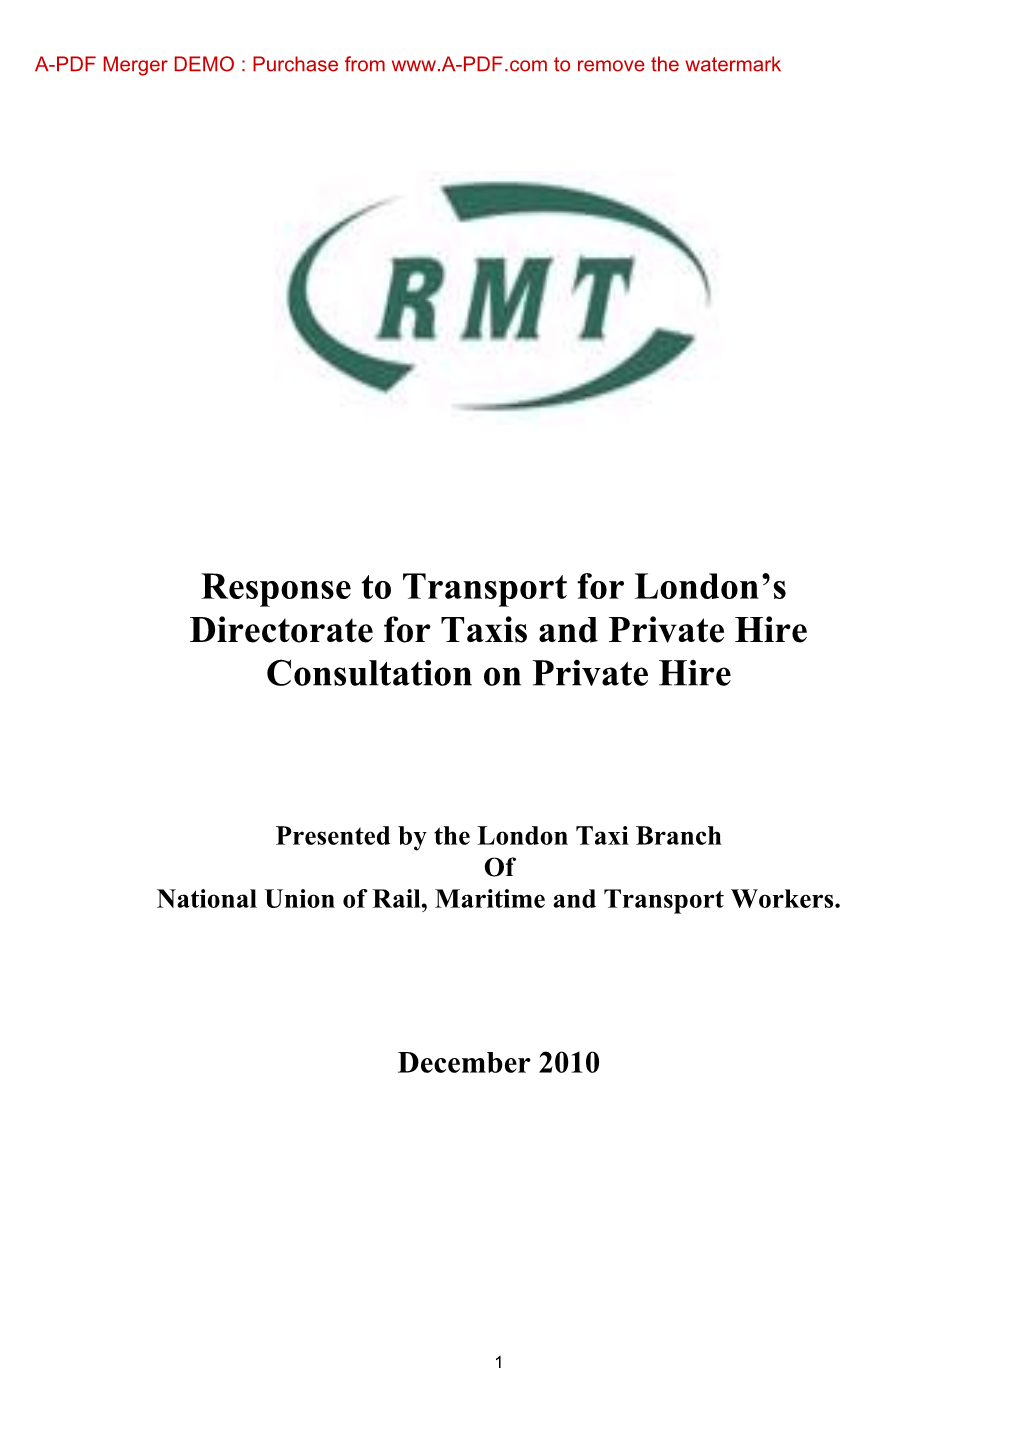 Response to Transport for London's Directorate for Taxis and Private